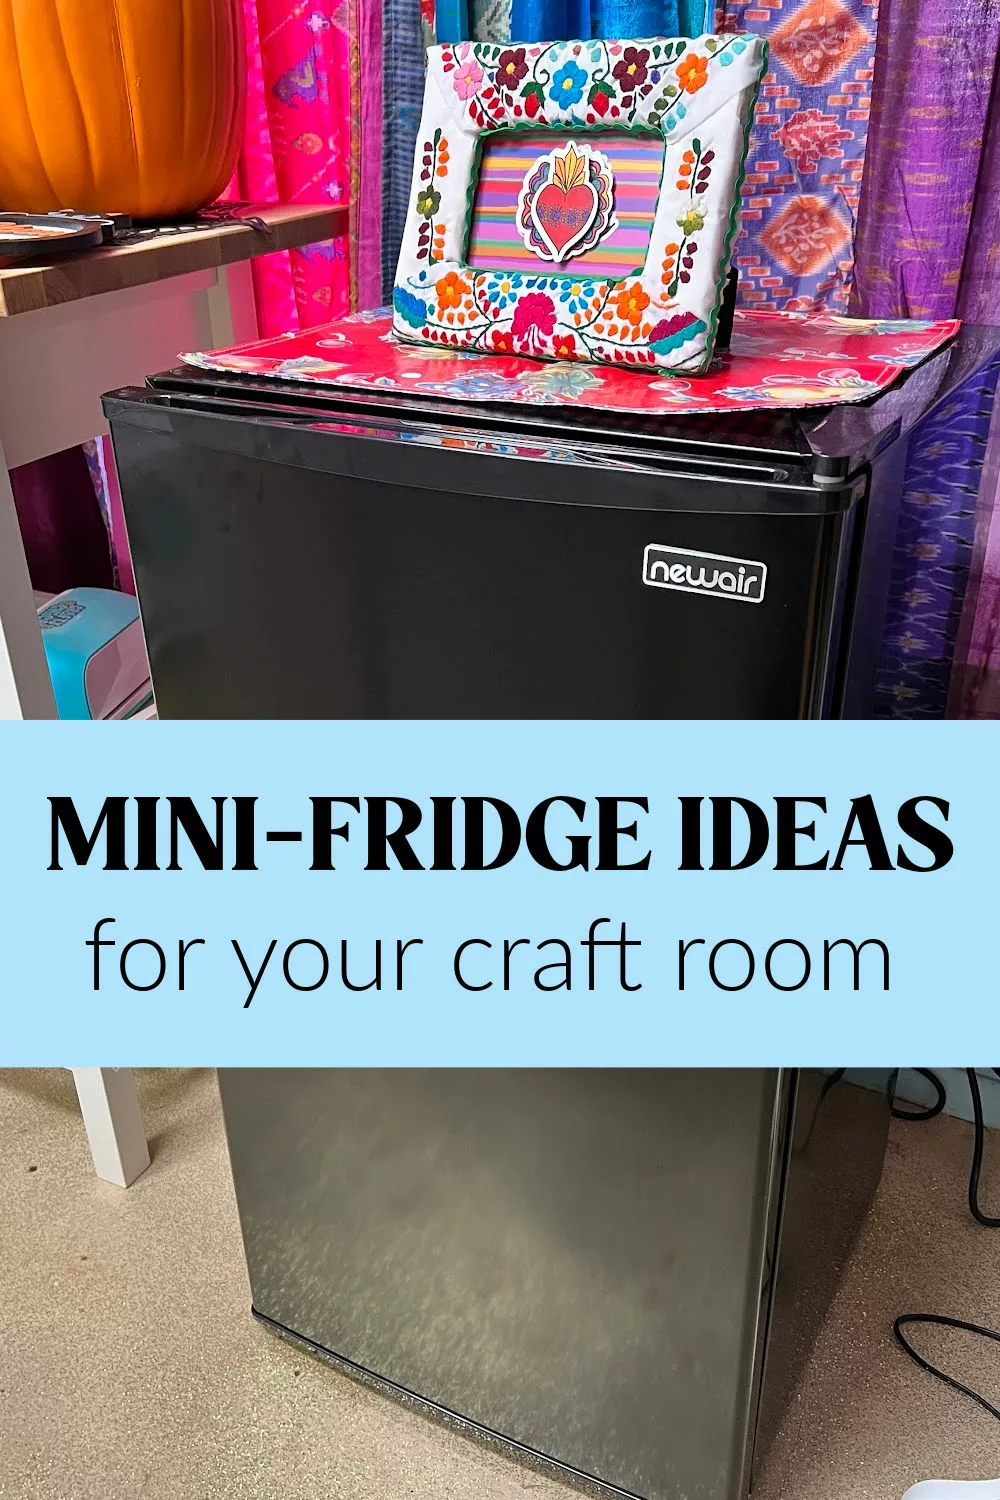 Mini-fridge ideas for your craft room - Crafty Chica